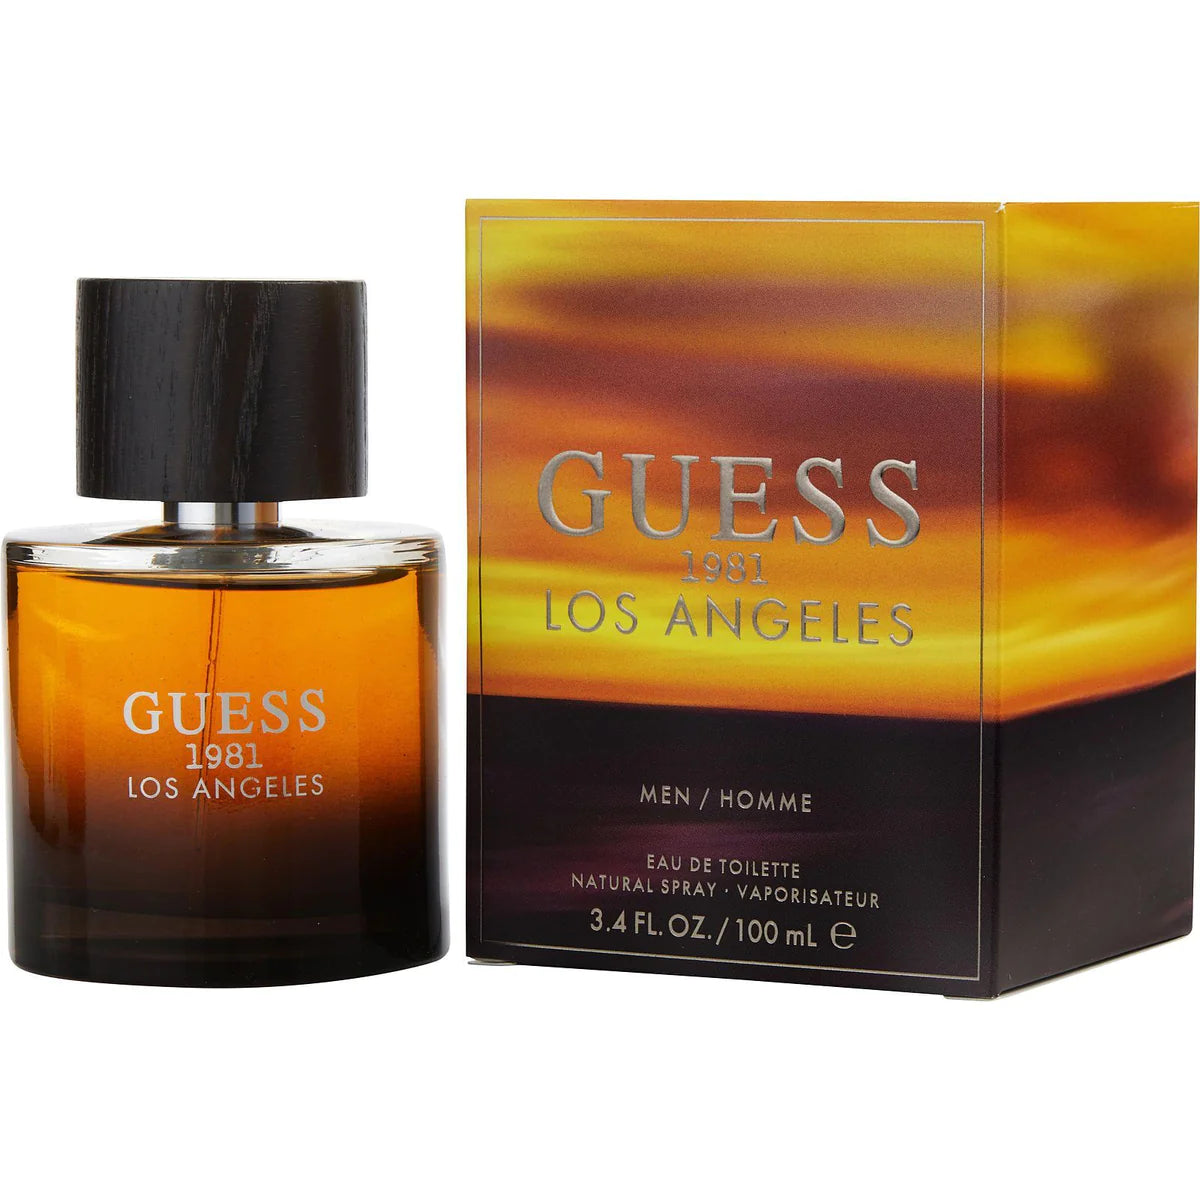 GUESS 1981 LOS ANGELES EDT (M) / 100 ML